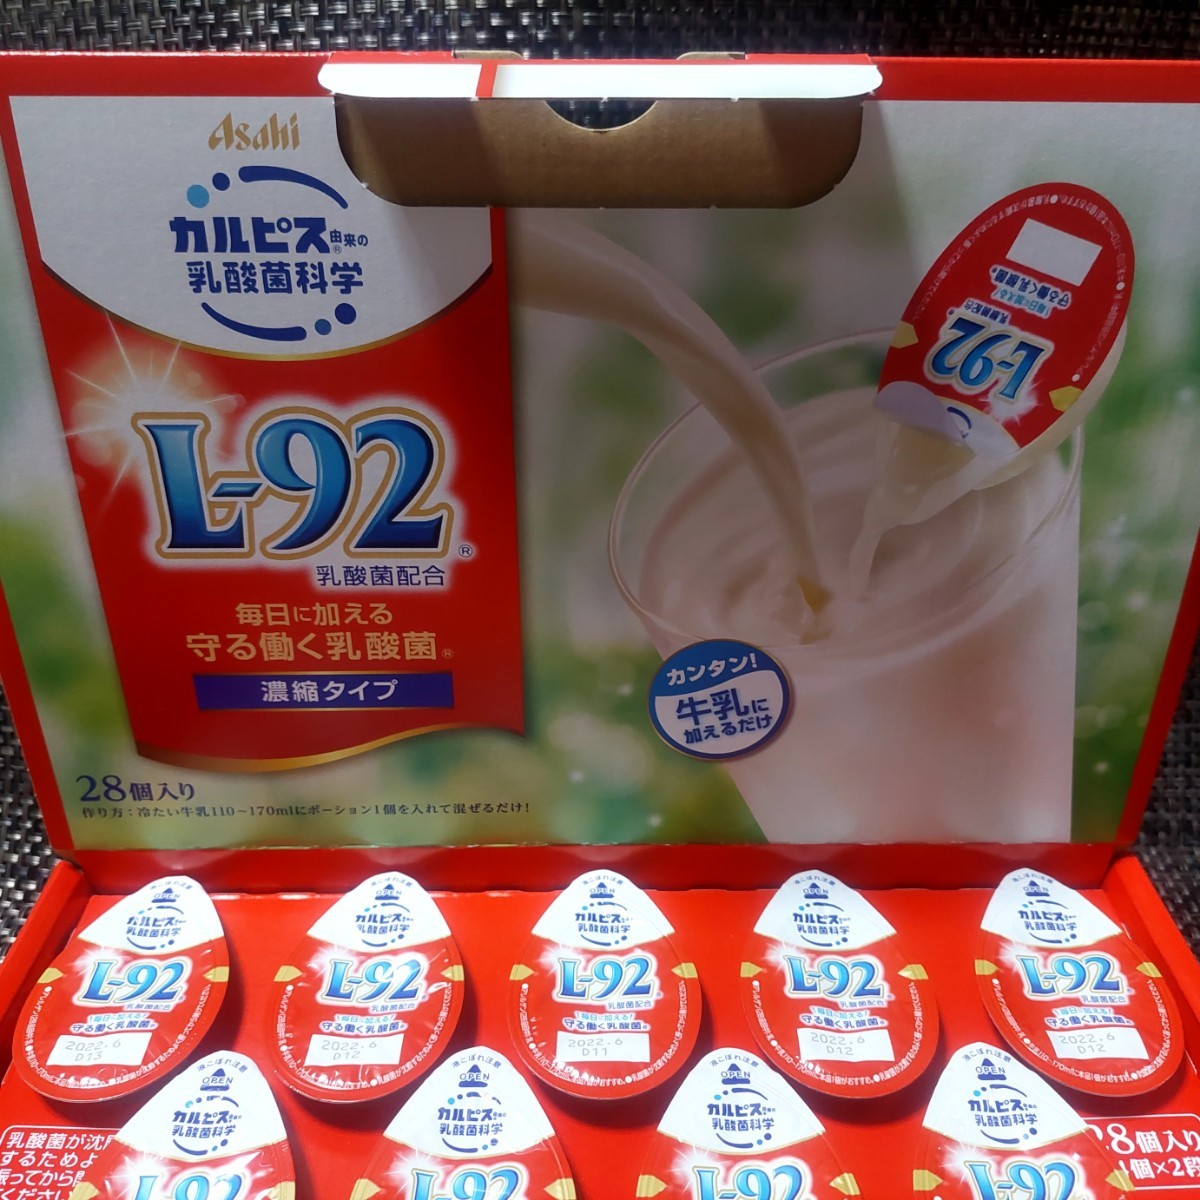 PayPayフリマ｜健康乳酸菌 ポーション ギフト 28個入り 送料込み カルピス アサヒ飲料 KNP3 お試し 守る働く乳酸菌